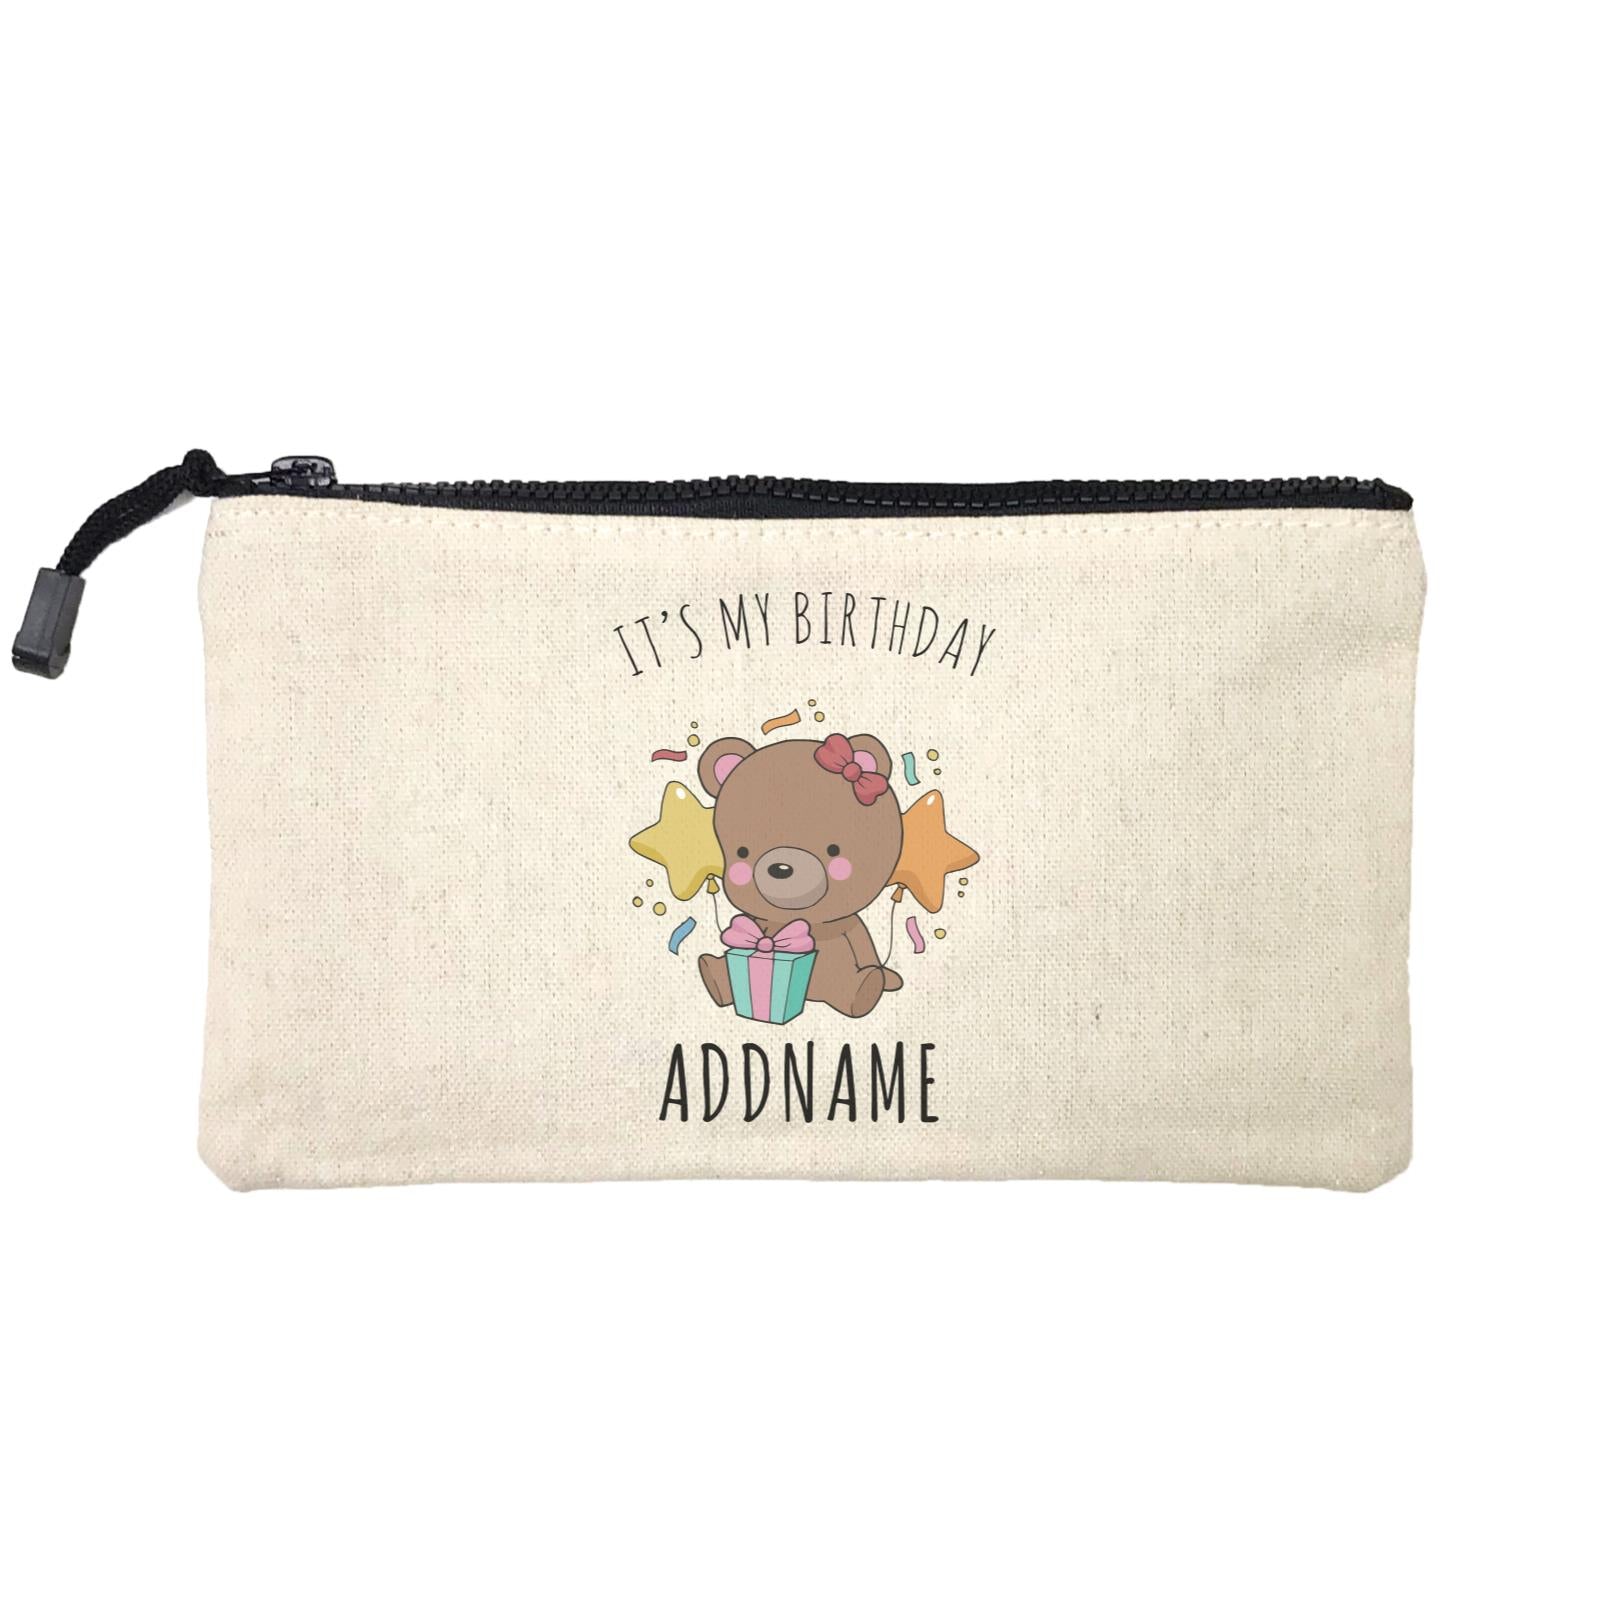 Birthday Sketch Animals Bear with Present It's My Birthday Addname Mini Accessories Stationery Pouch